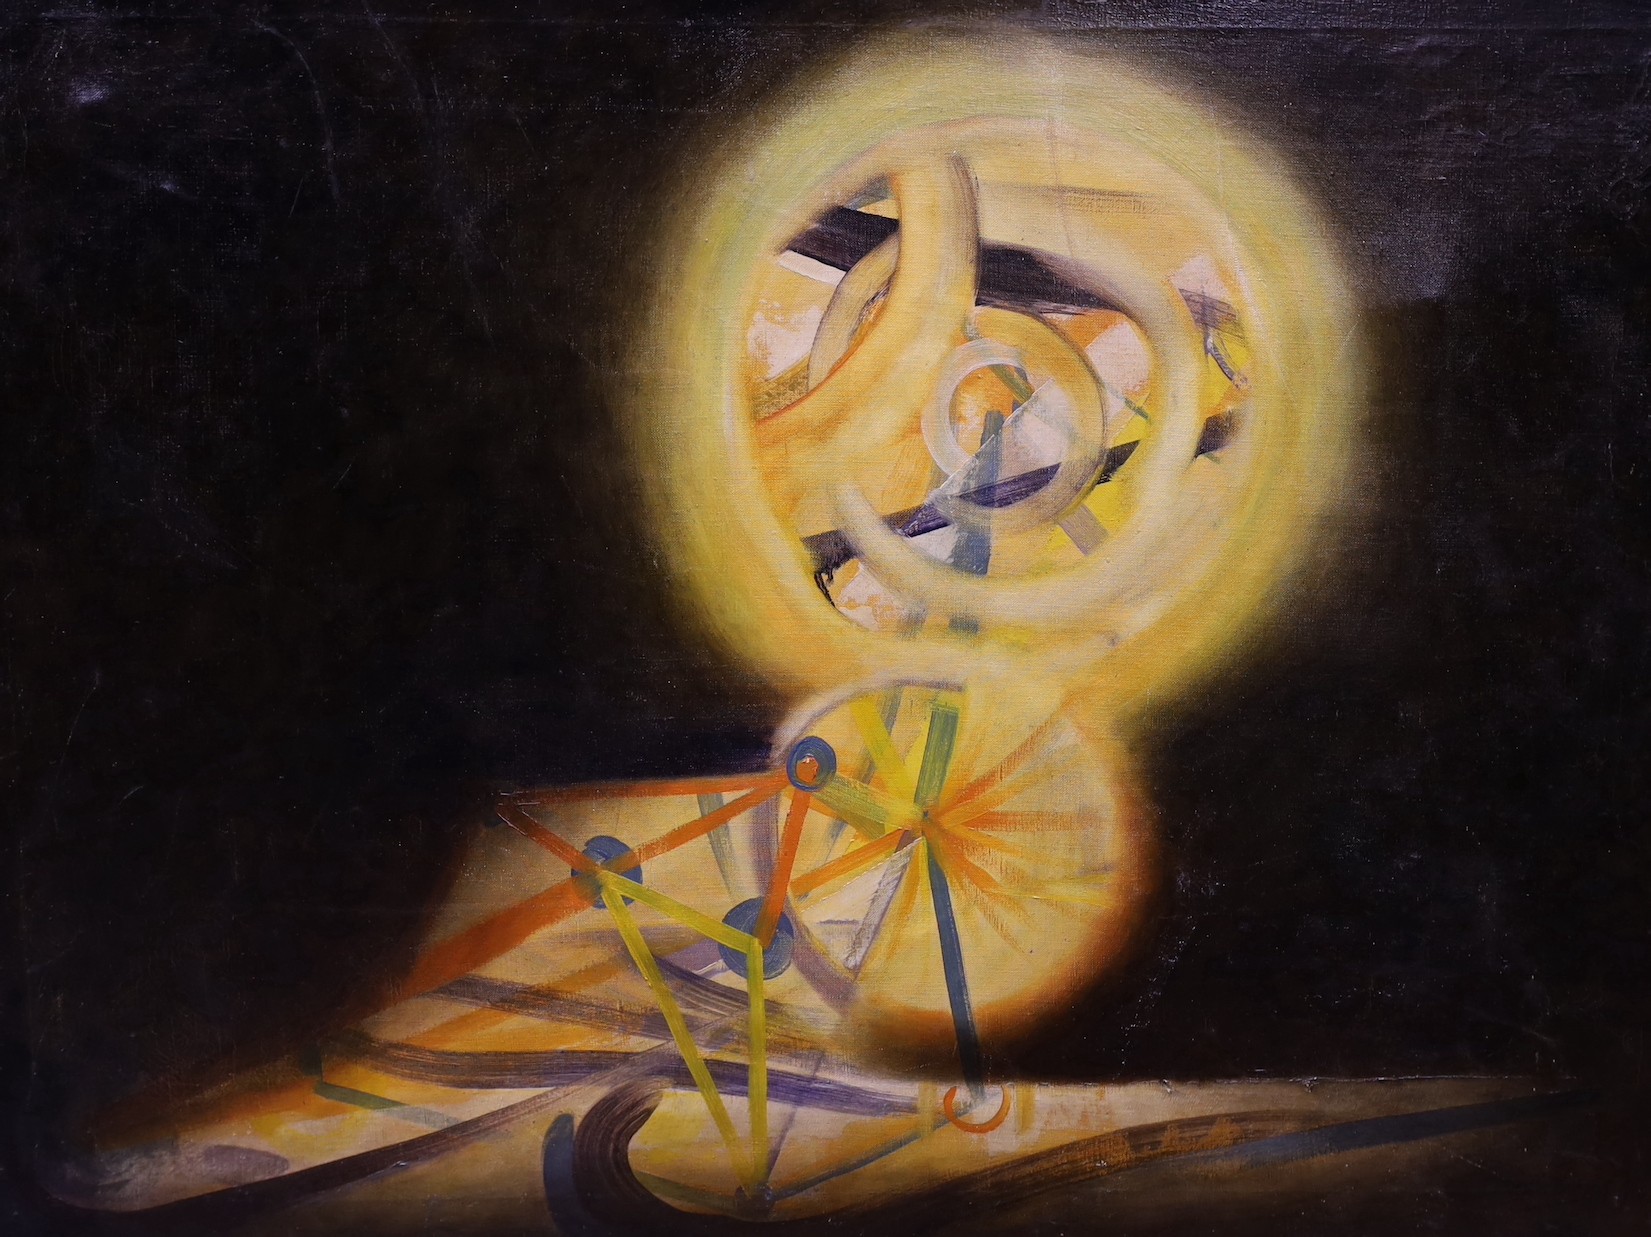 Robin Baring (b.1931), oil on canvas, The Golden Spheres, signed and dated 1966, Crane Kalman Gallery label verso, 67 x 91 cm